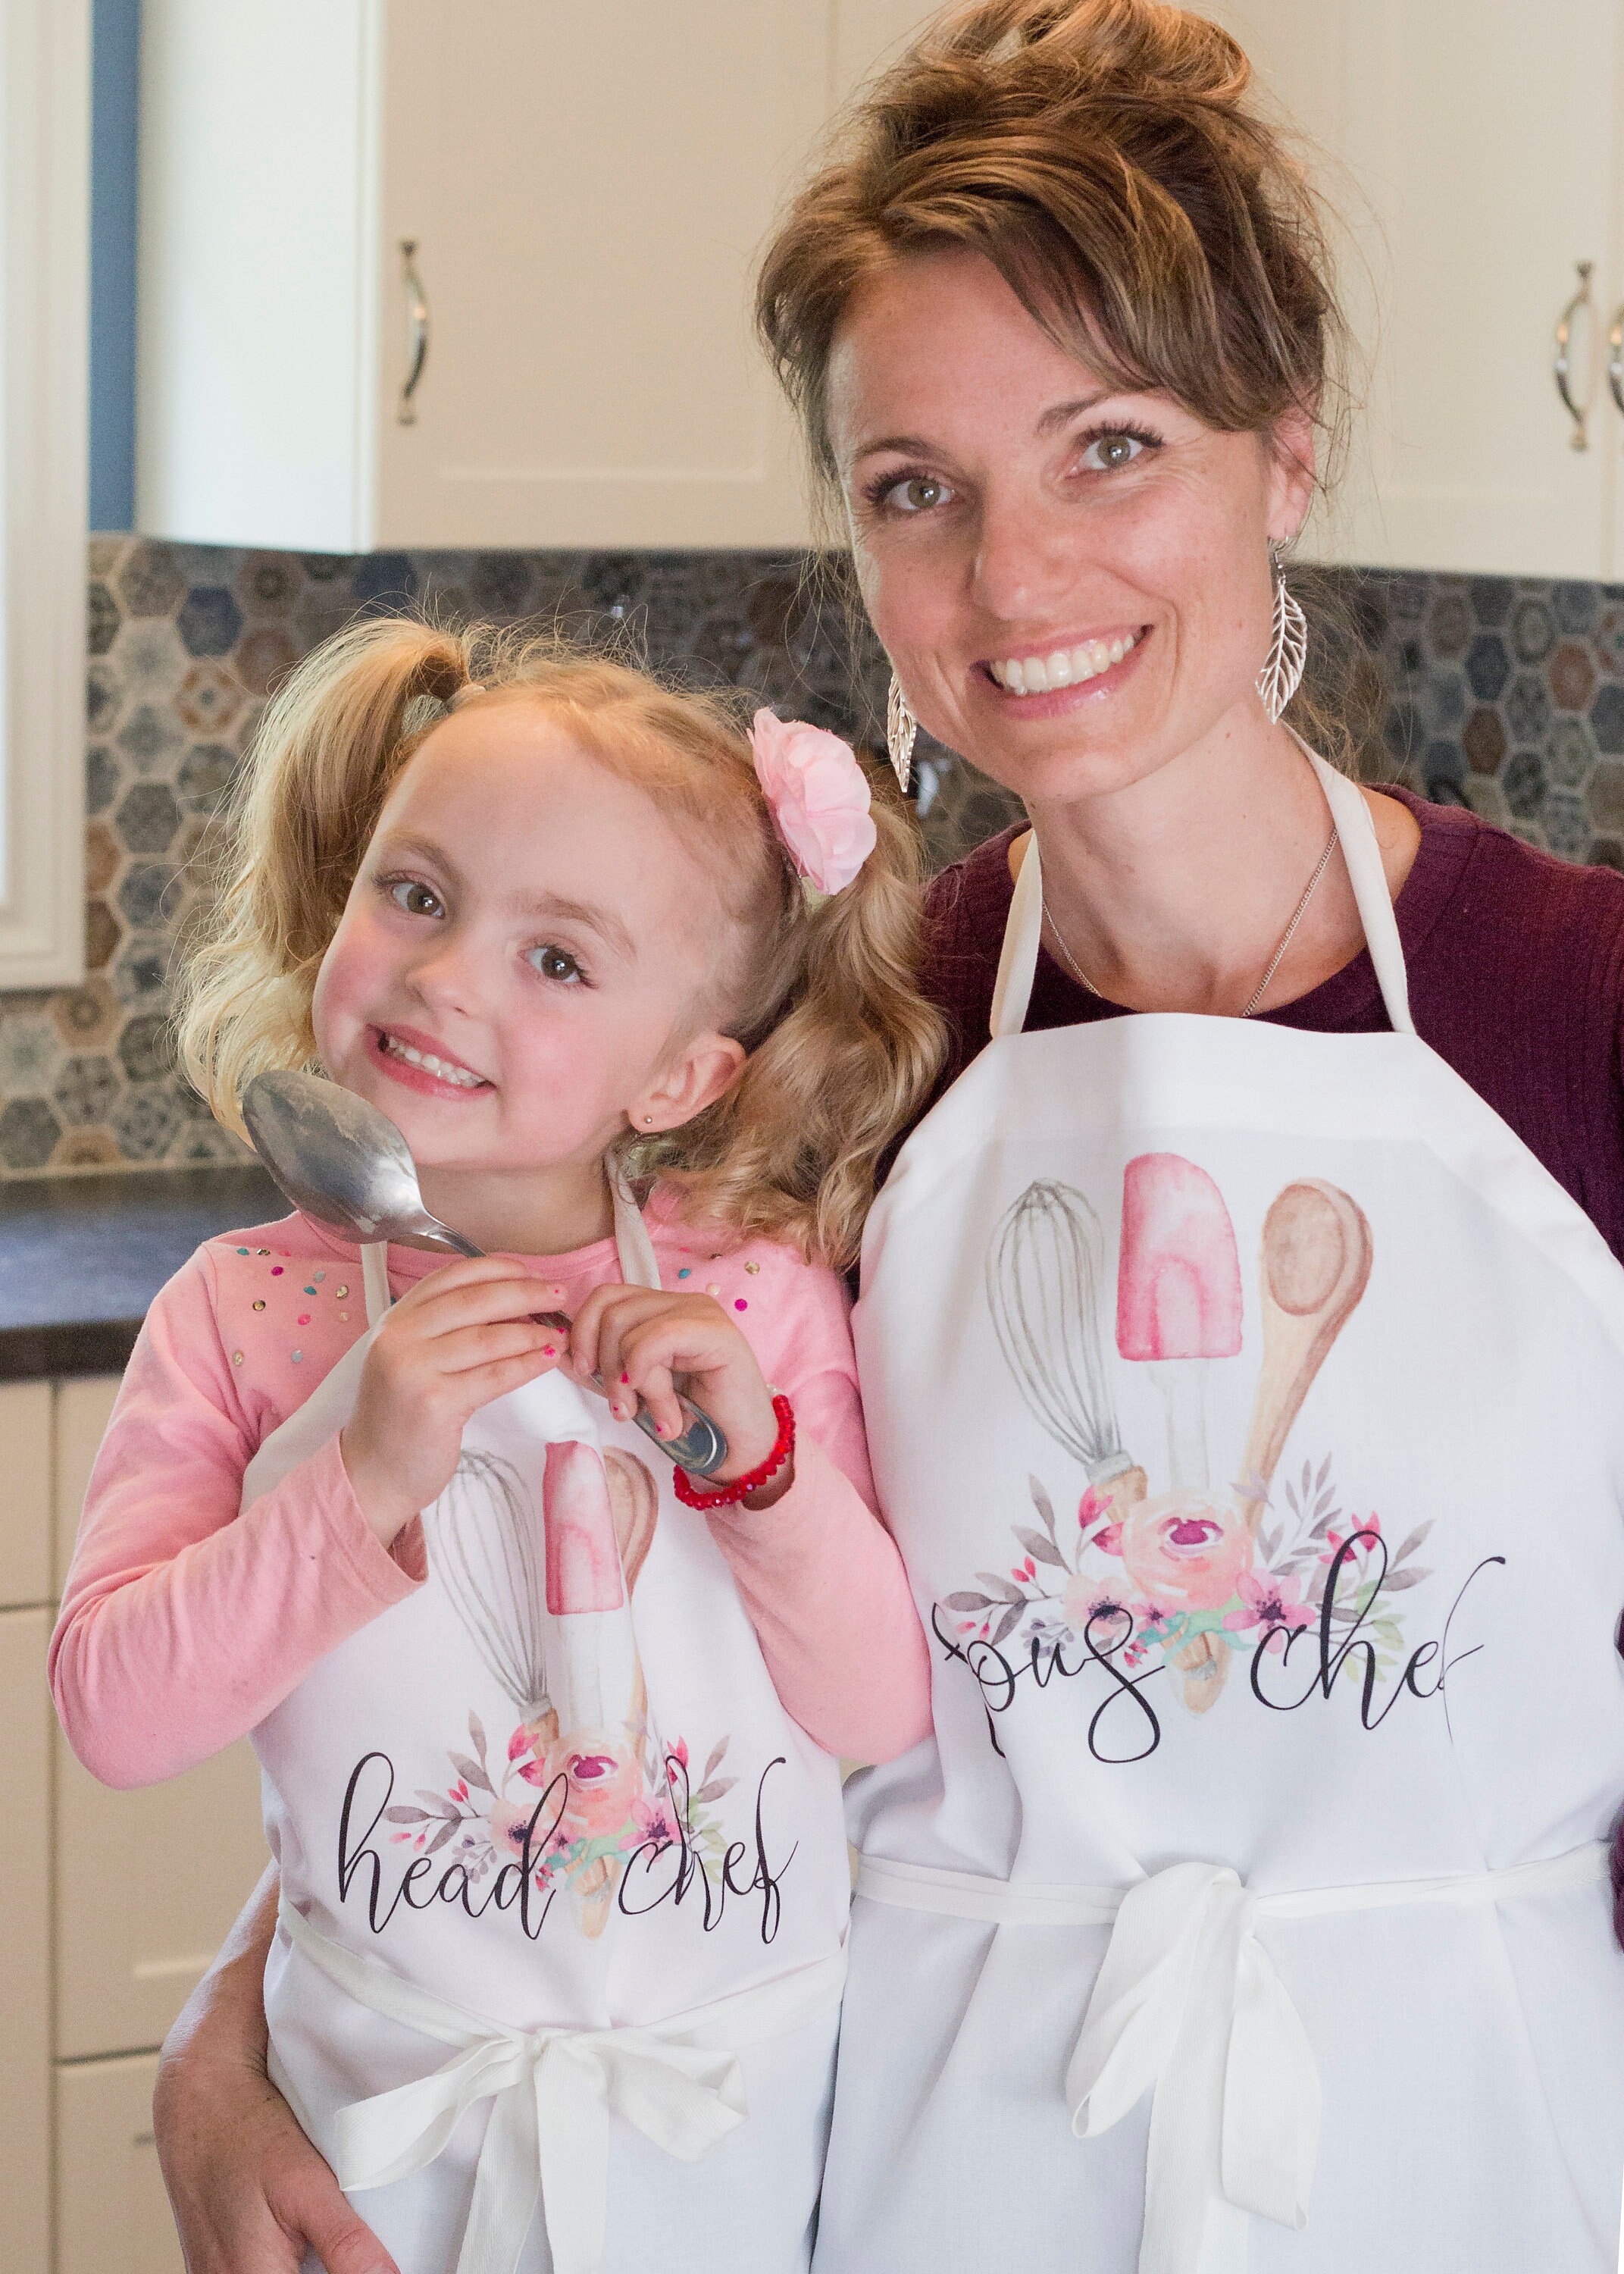 Personalized Mommy and Me Aprons with Black and White Polka Dots | Monogrammed Mother Daughter Aprons | Matching Aprons | Mommy Daughter Apron Set